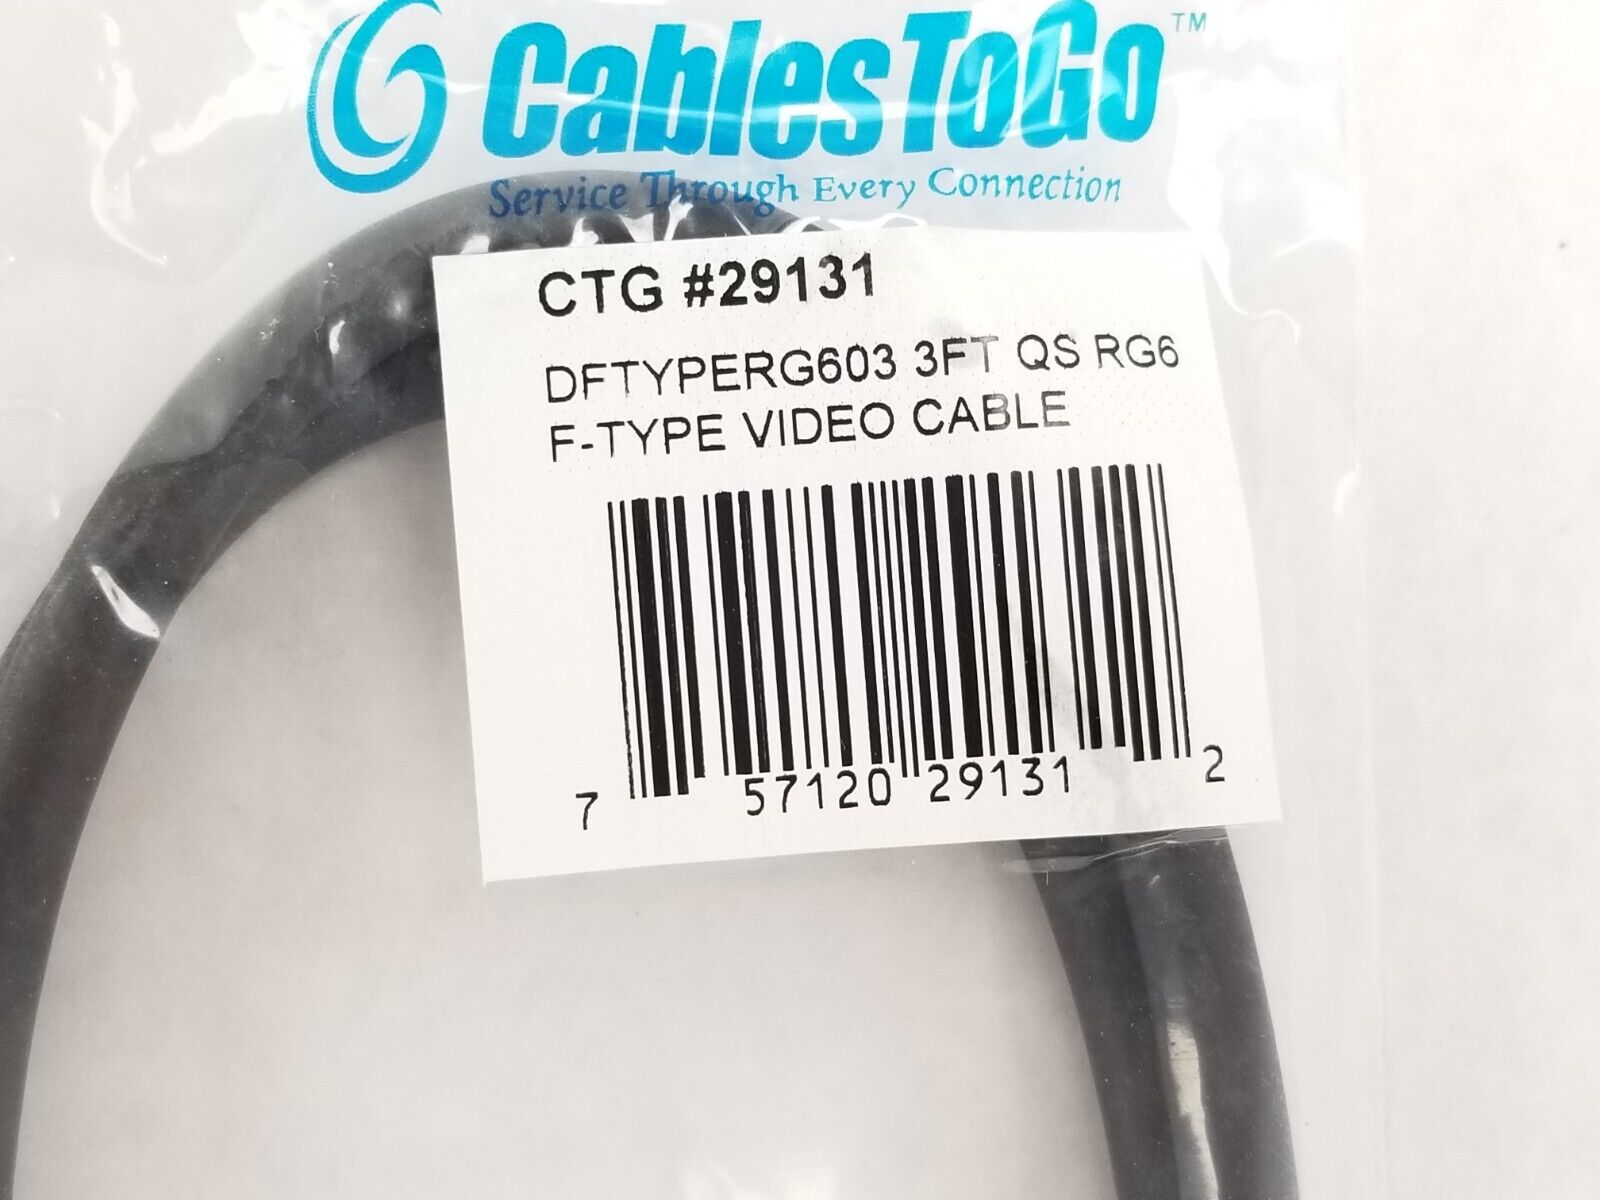 Lot of (8) CABLES TO GO 29131 3FT QS RG6 F-Type Video Cable NEW